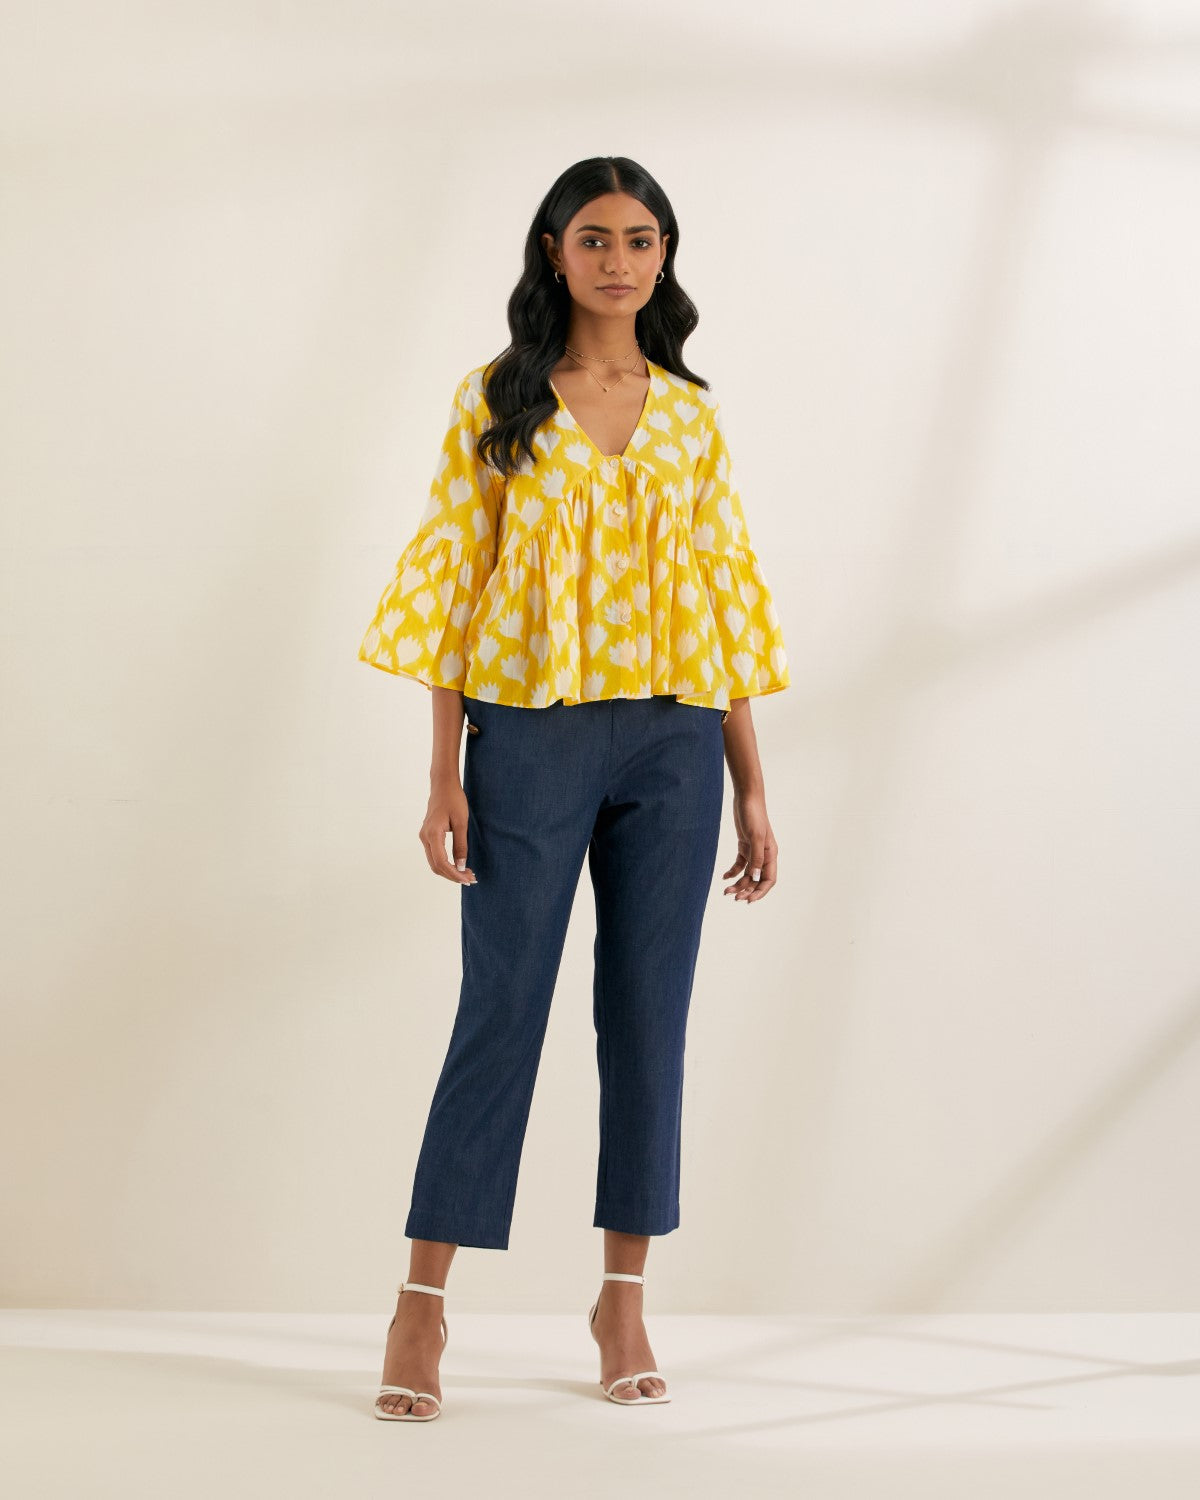 Sunshine- Yellow top with gathered bodice